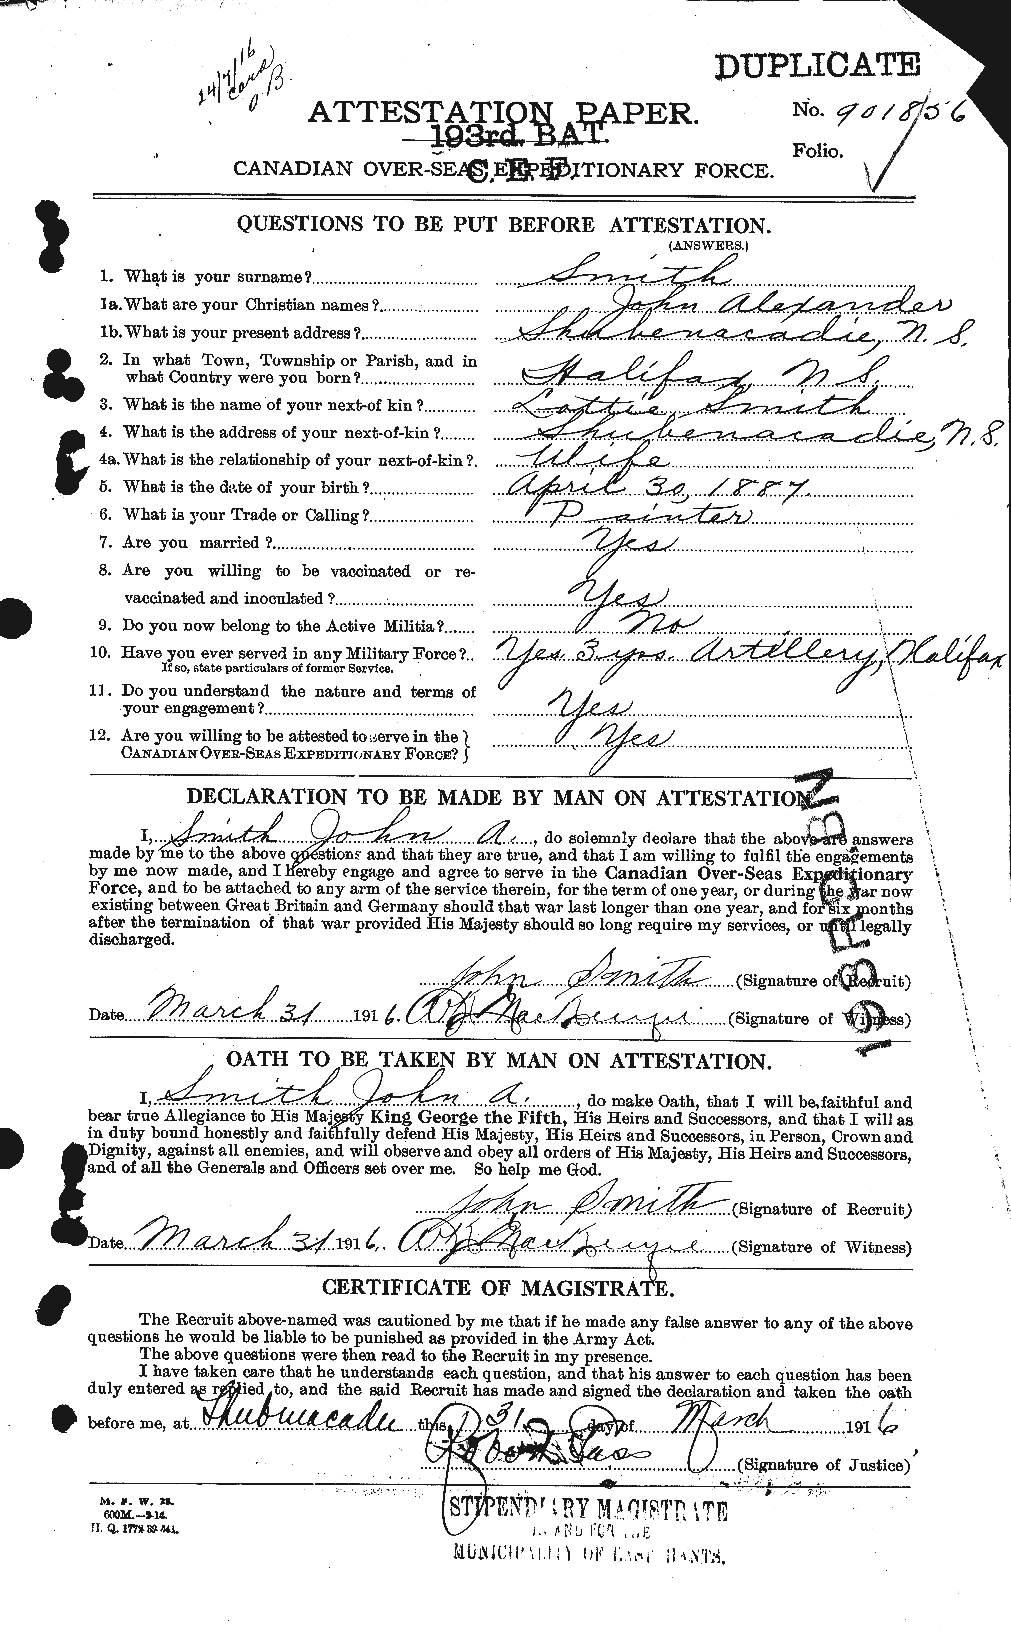 Personnel Records of the First World War - CEF 106459a